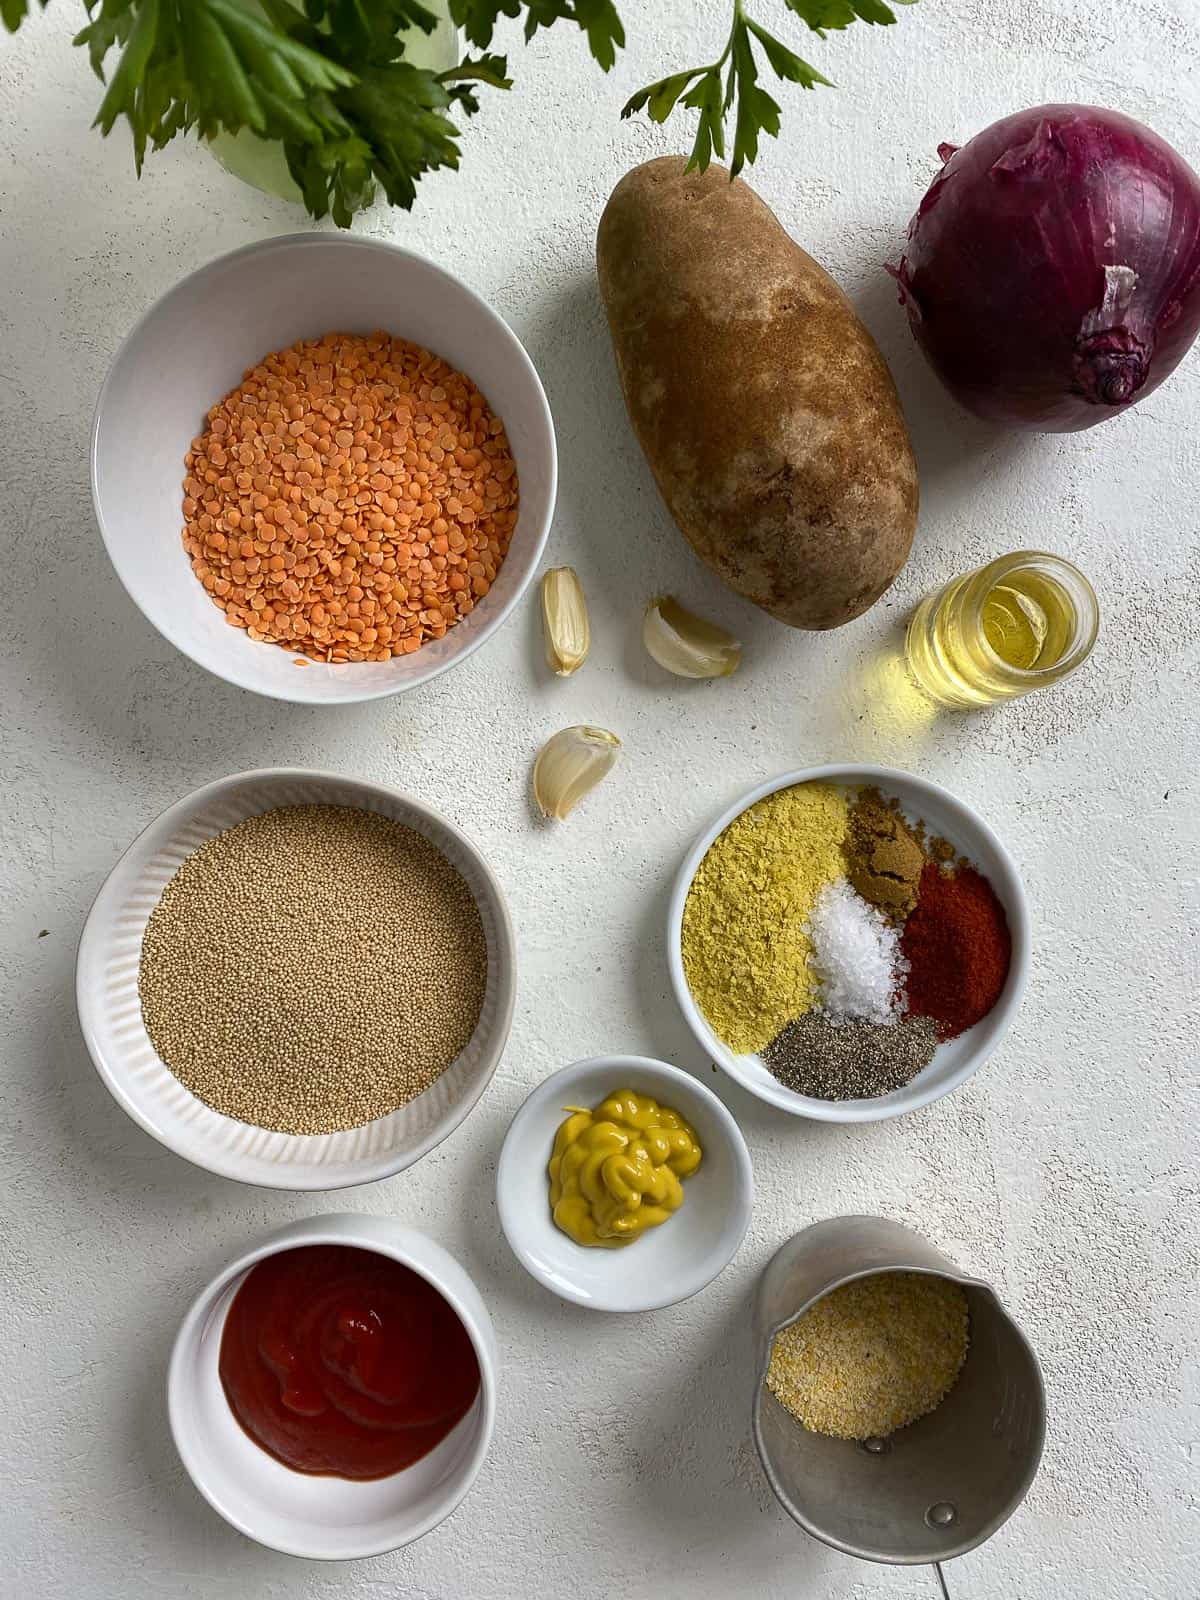 ingredients for Easy Red Lentil Patties measured out against a white surface